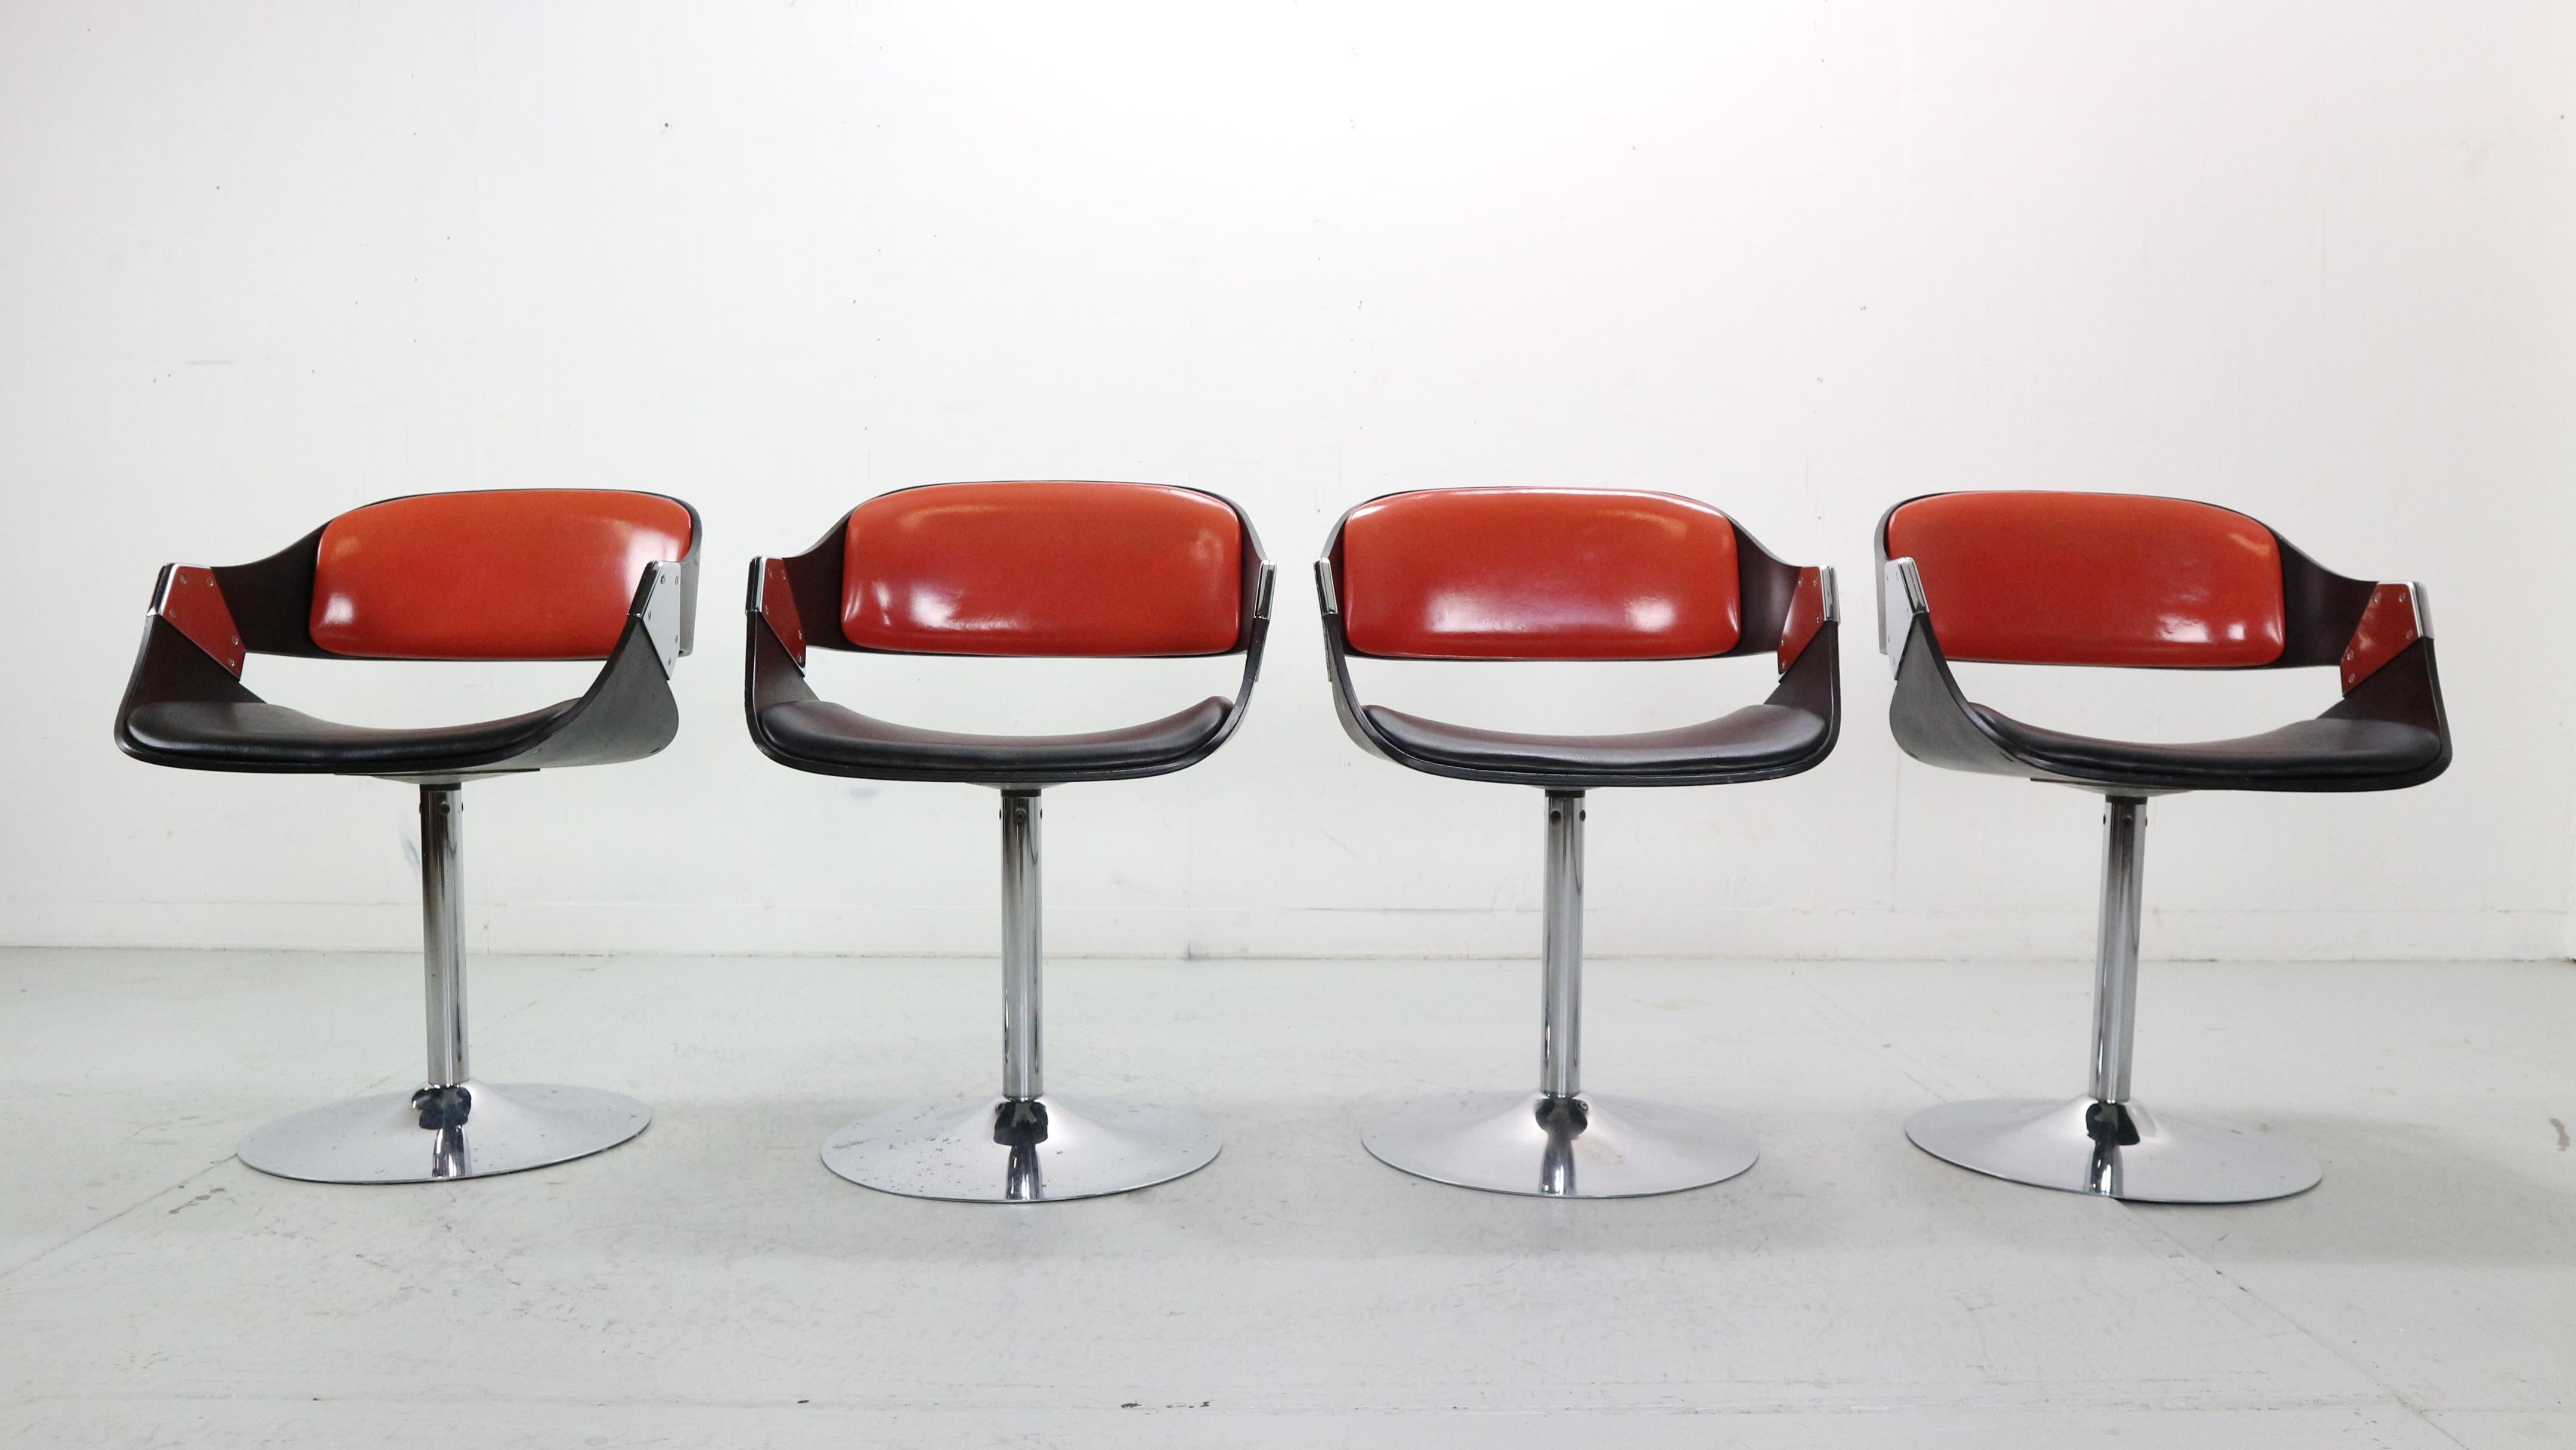 Space age period set of 4 dinning swivel chairs designed by Rudi Verelst and manufactured by Novalux, in 1970's period Belgium.

Model- 